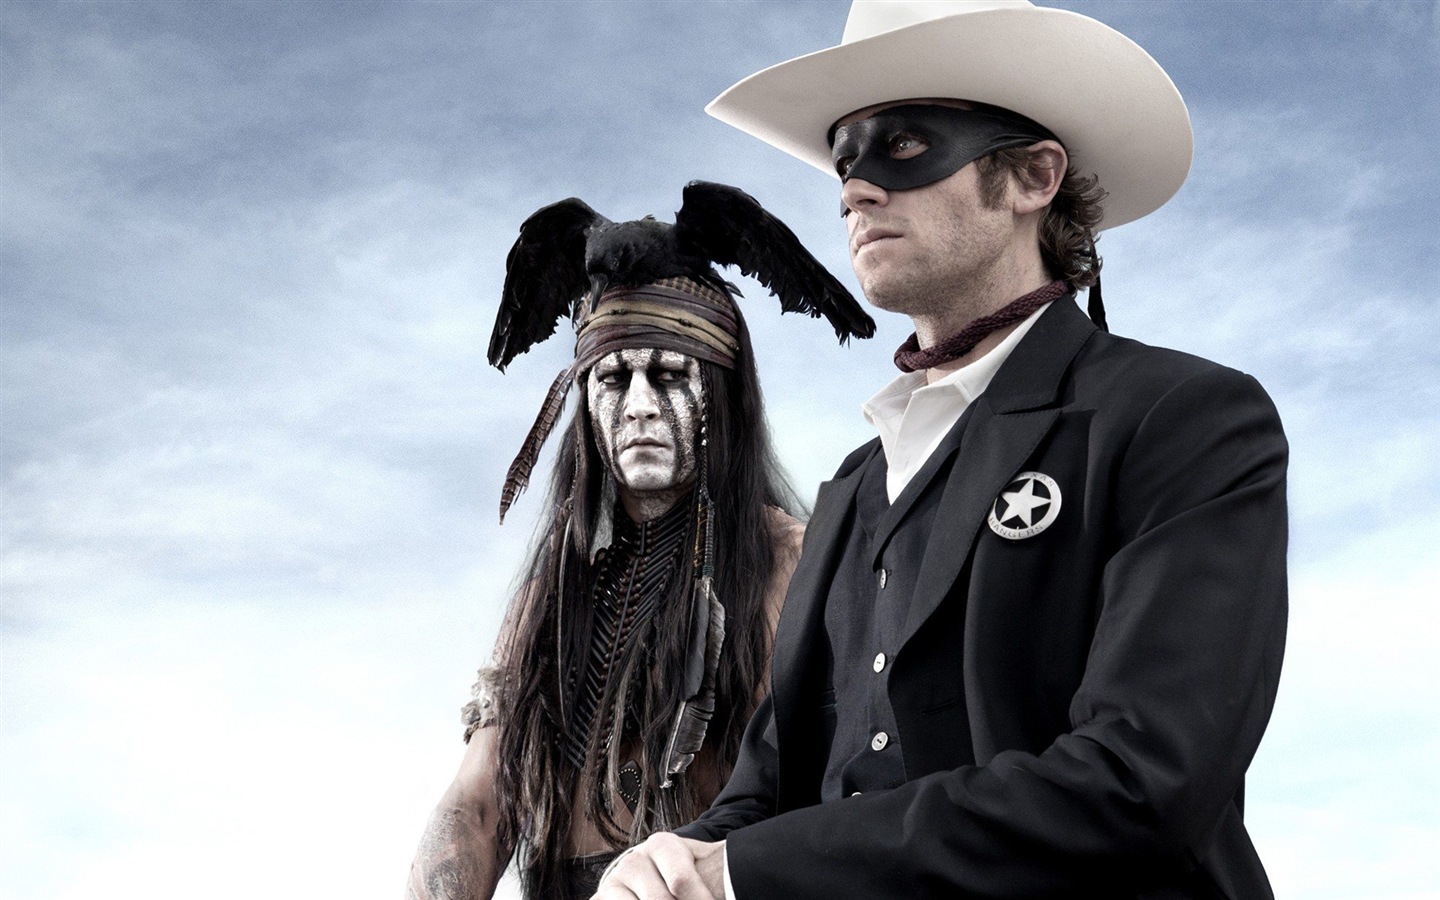 The Lone Ranger HD movie wallpapers #2 - 1440x900